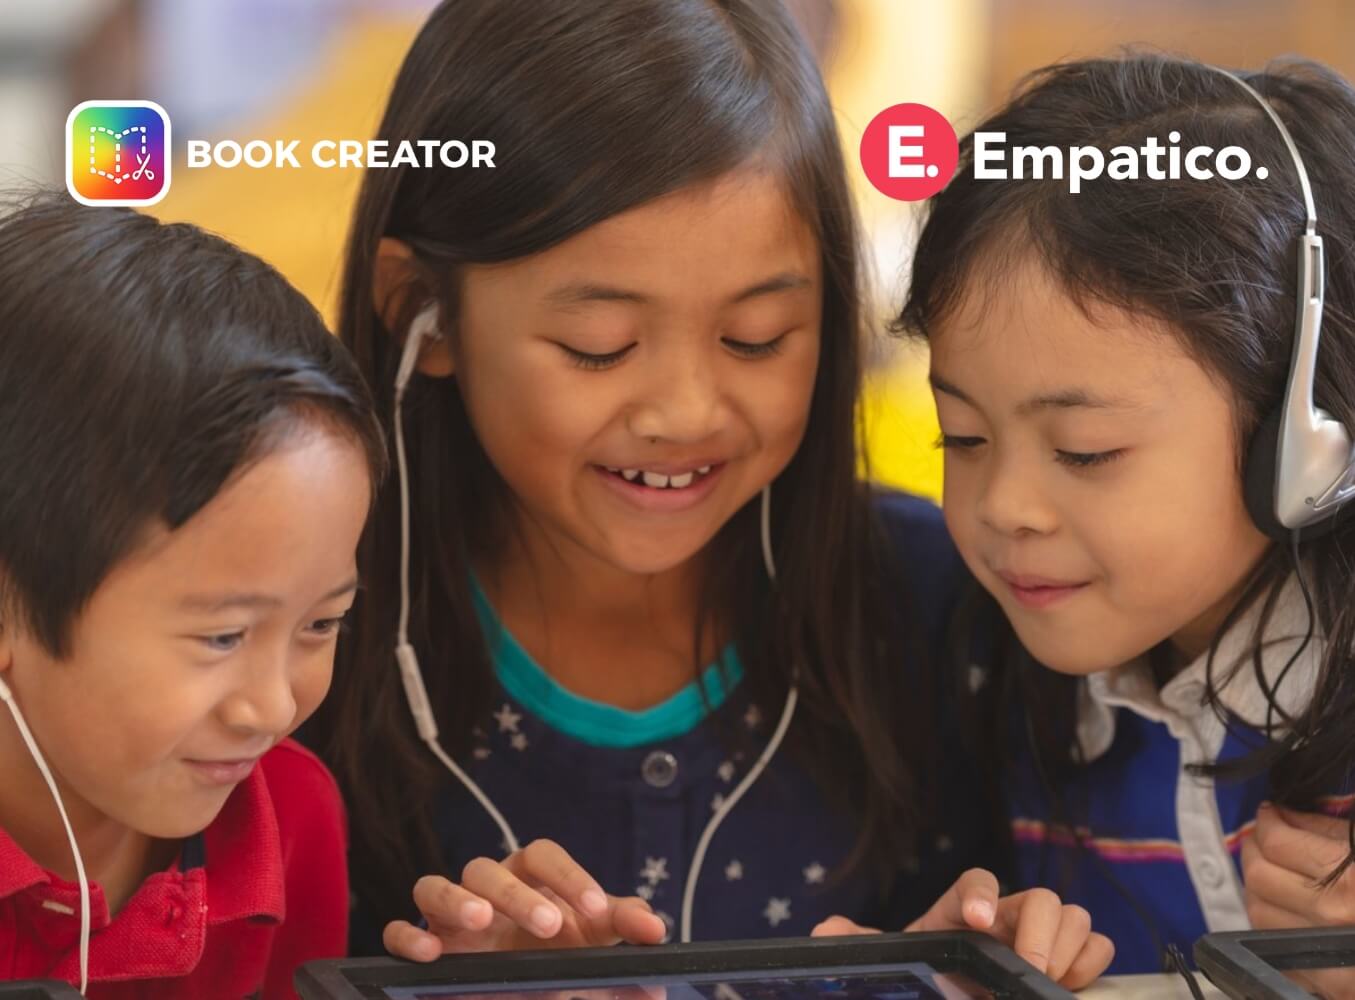 Featured Image for “Build empathy and collaboration into your classroom – here’s how”